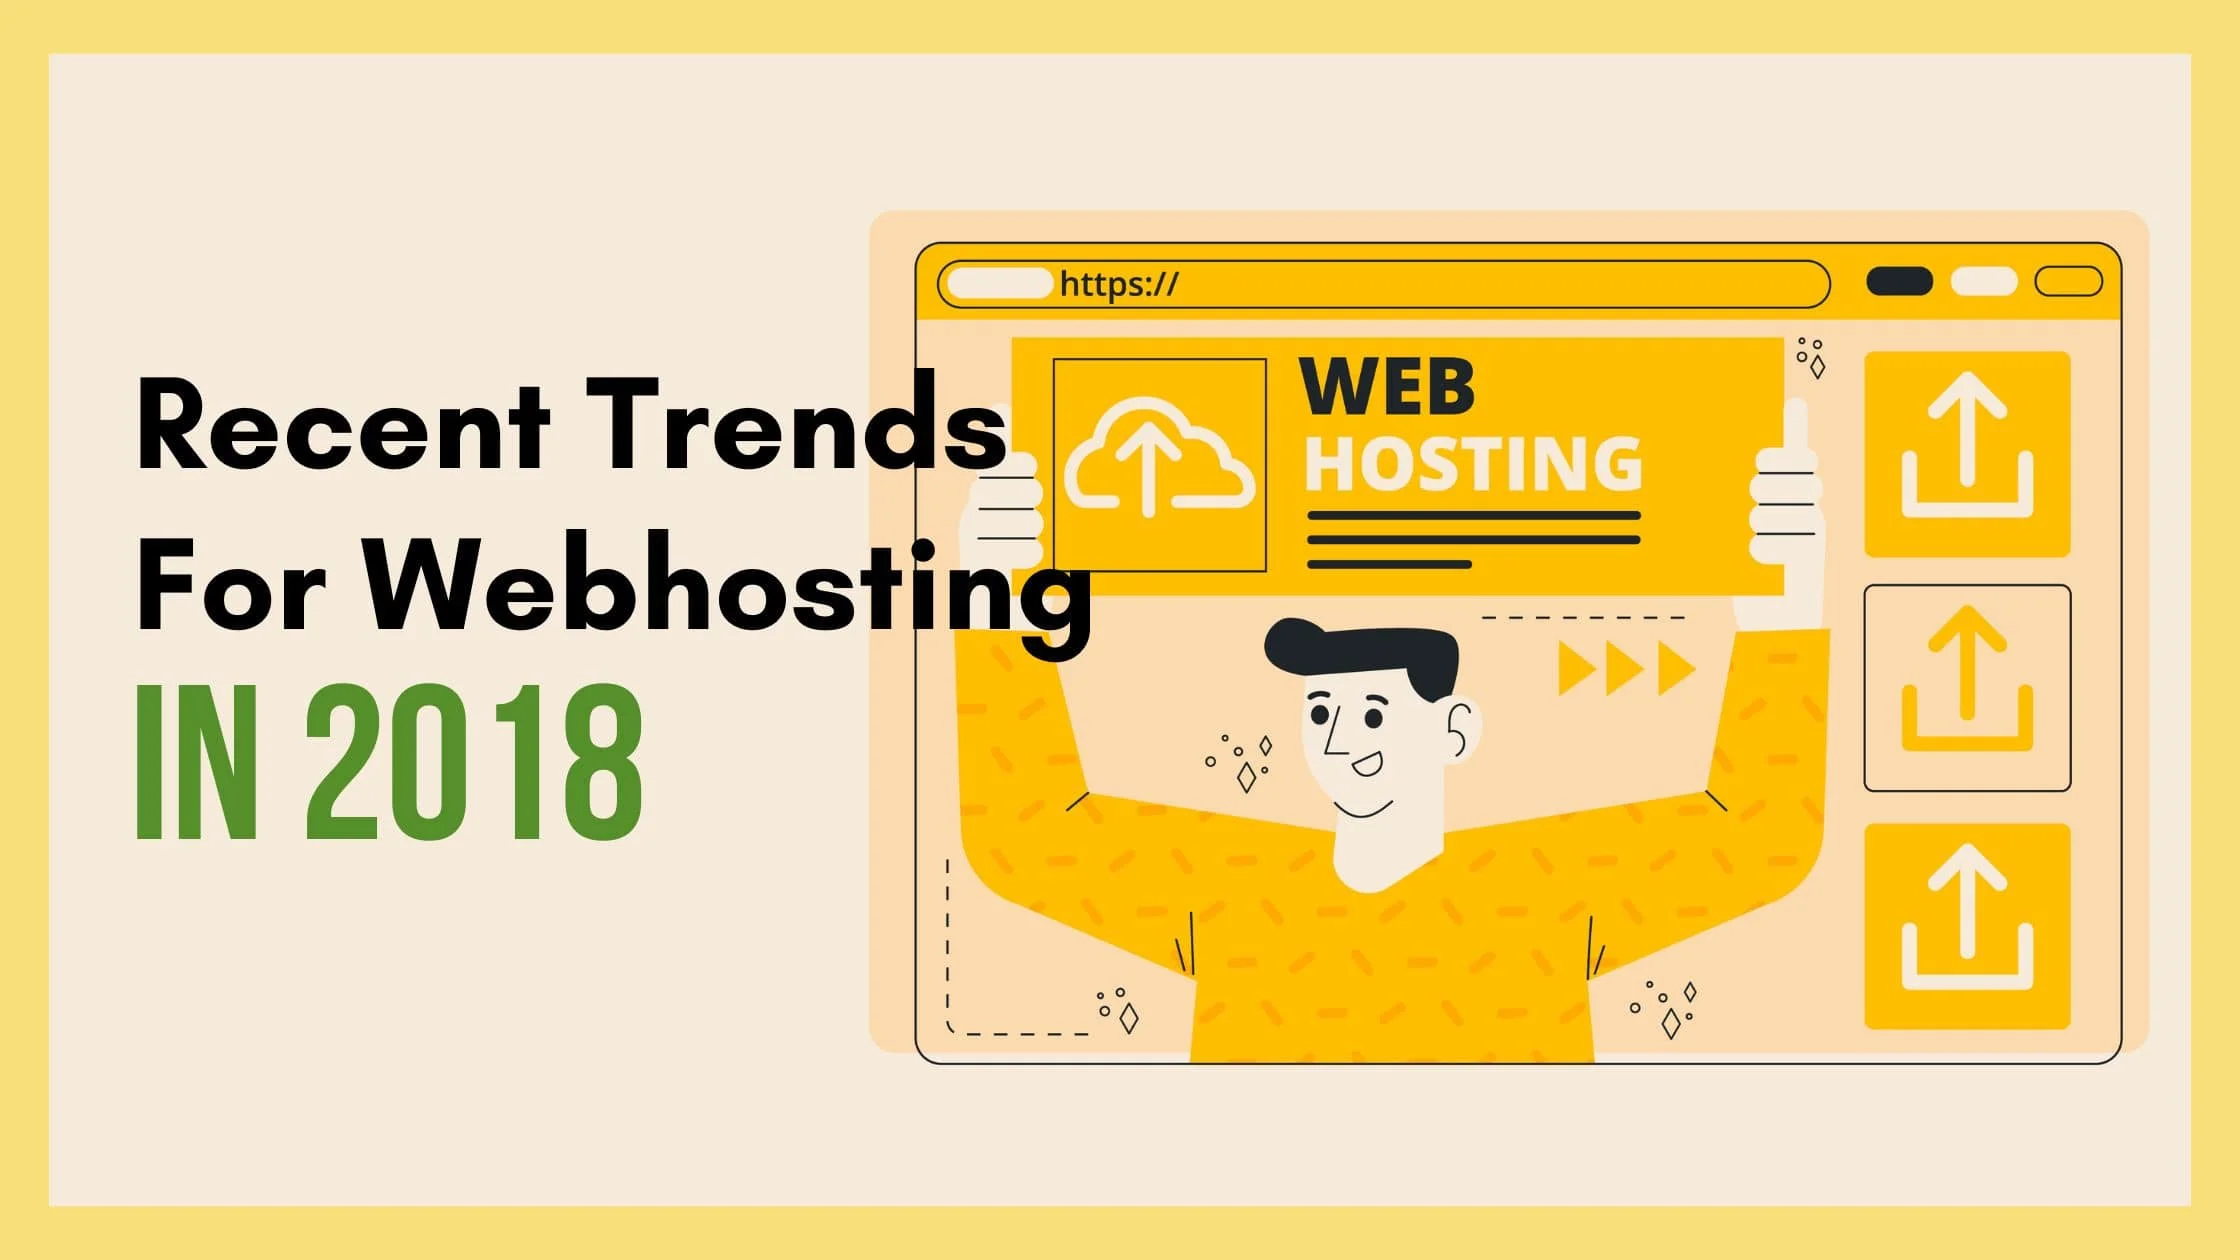 Recent trends for web hosting in 2018